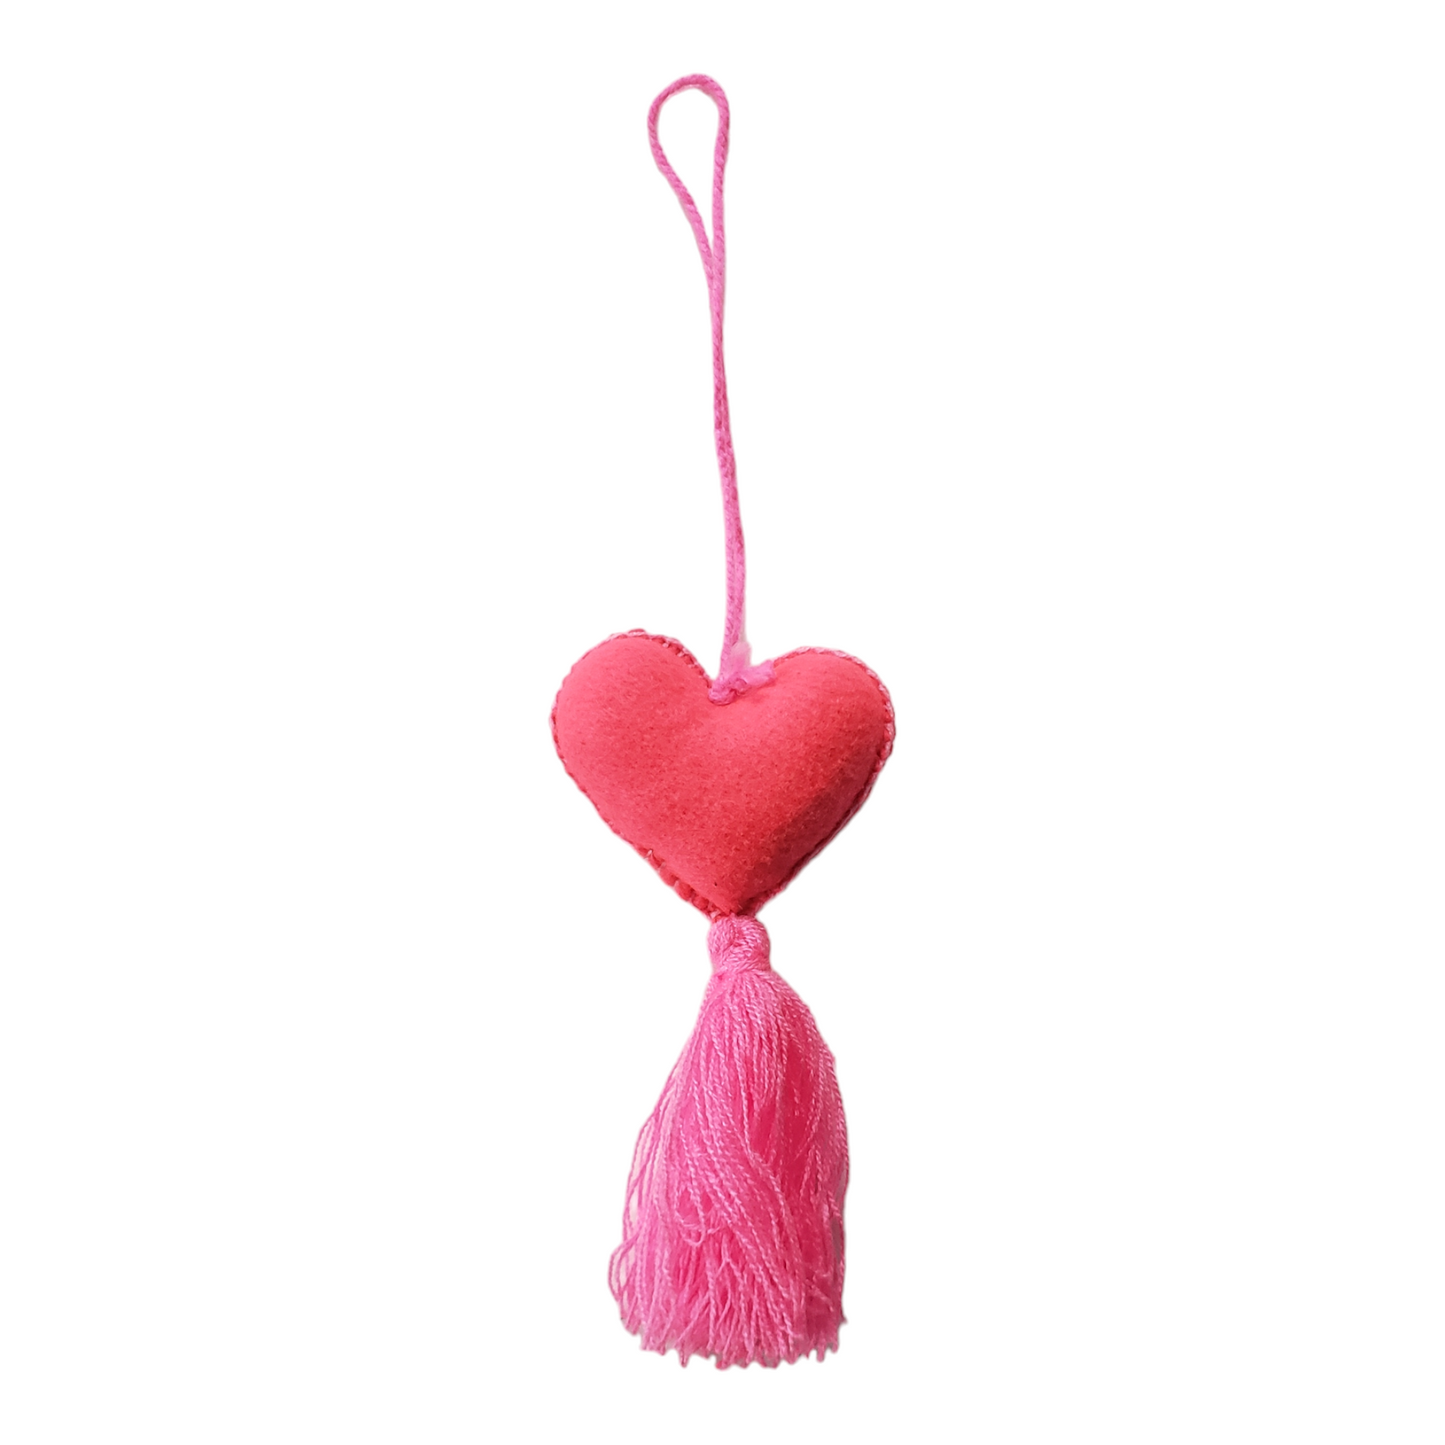 Pink Felt Heart Ornament from Chiapas Mexico